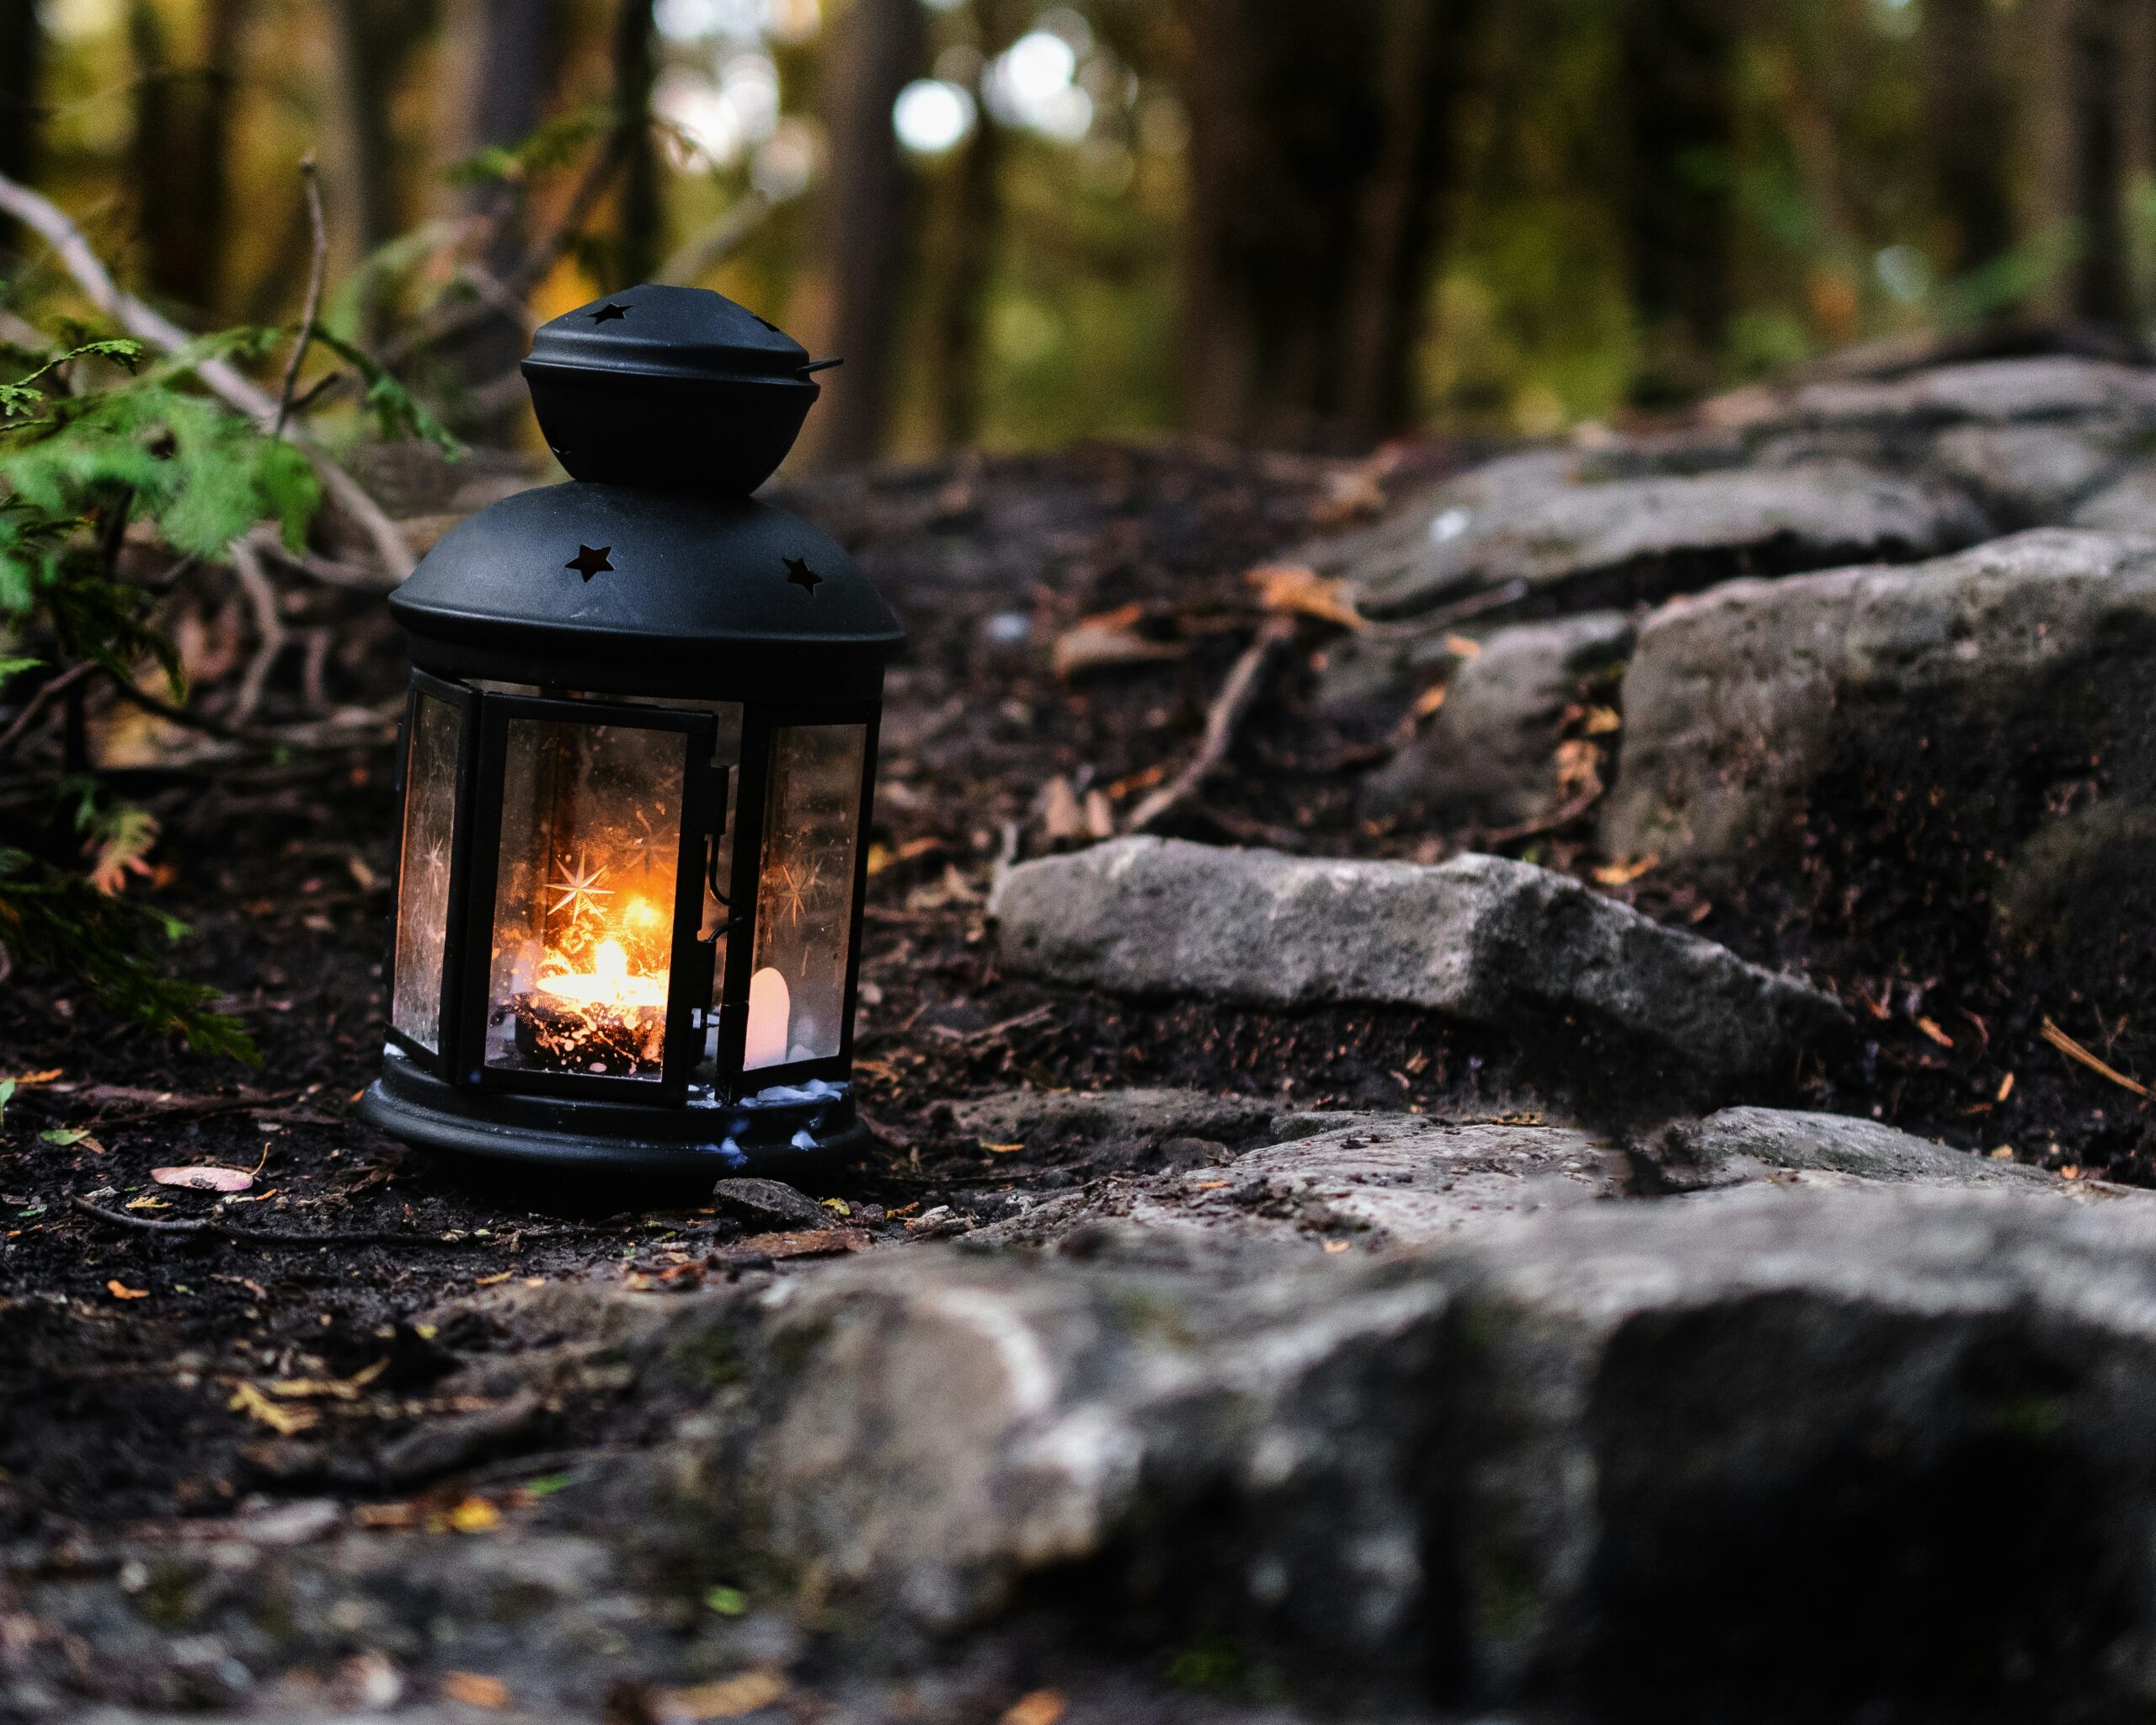 Best Camping lanterns for our adventure